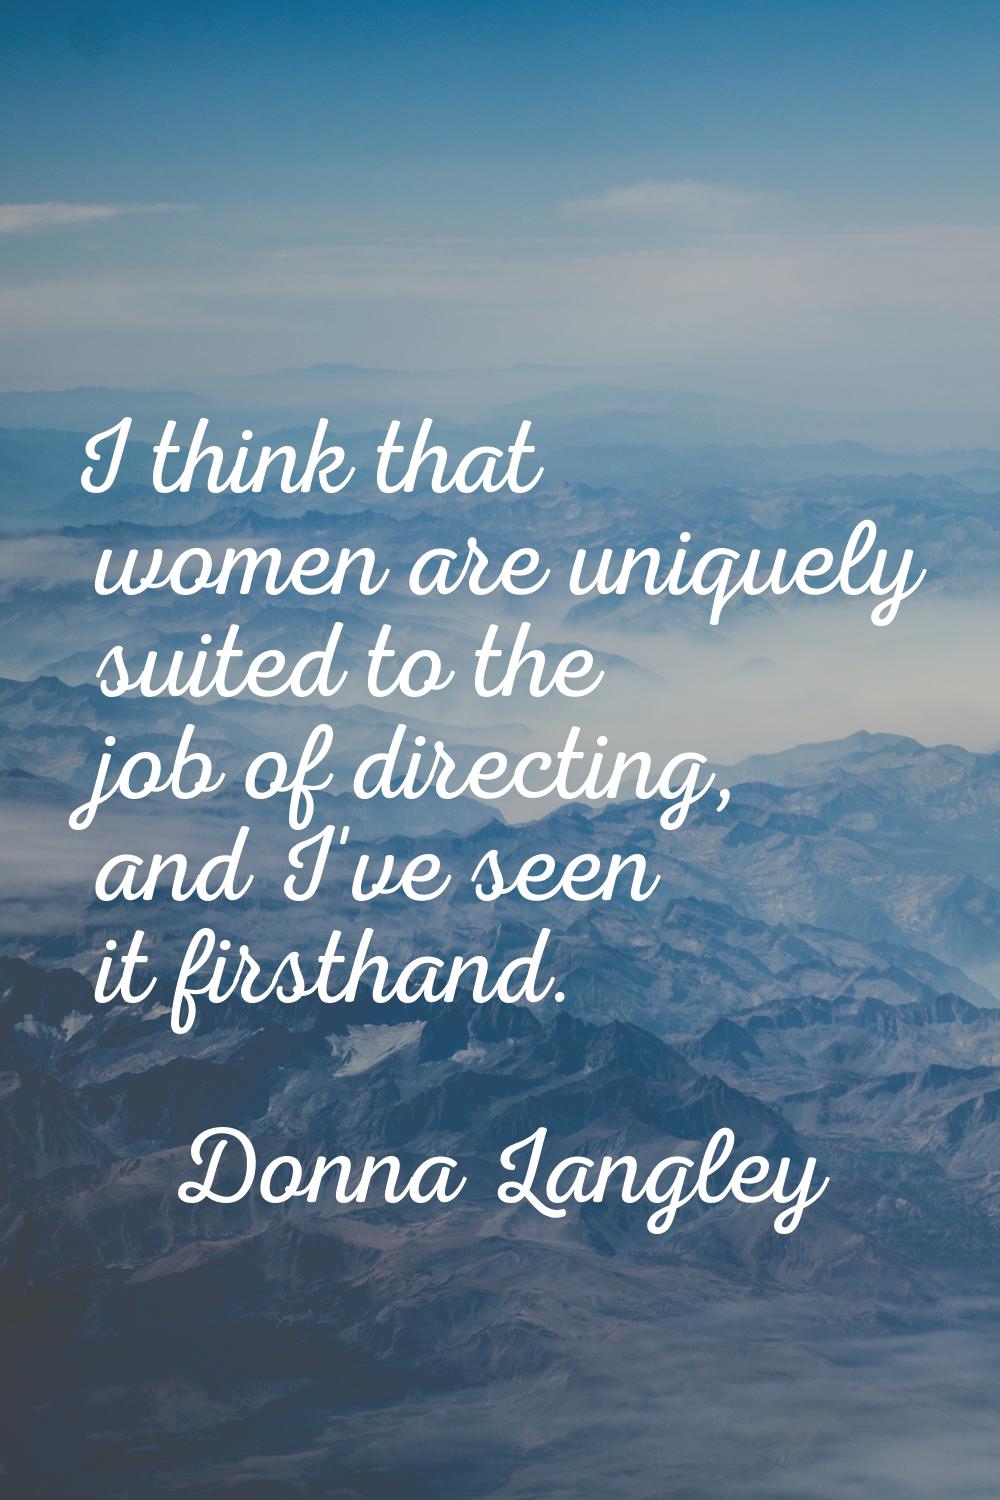 I think that women are uniquely suited to the job of directing, and I've seen it firsthand.